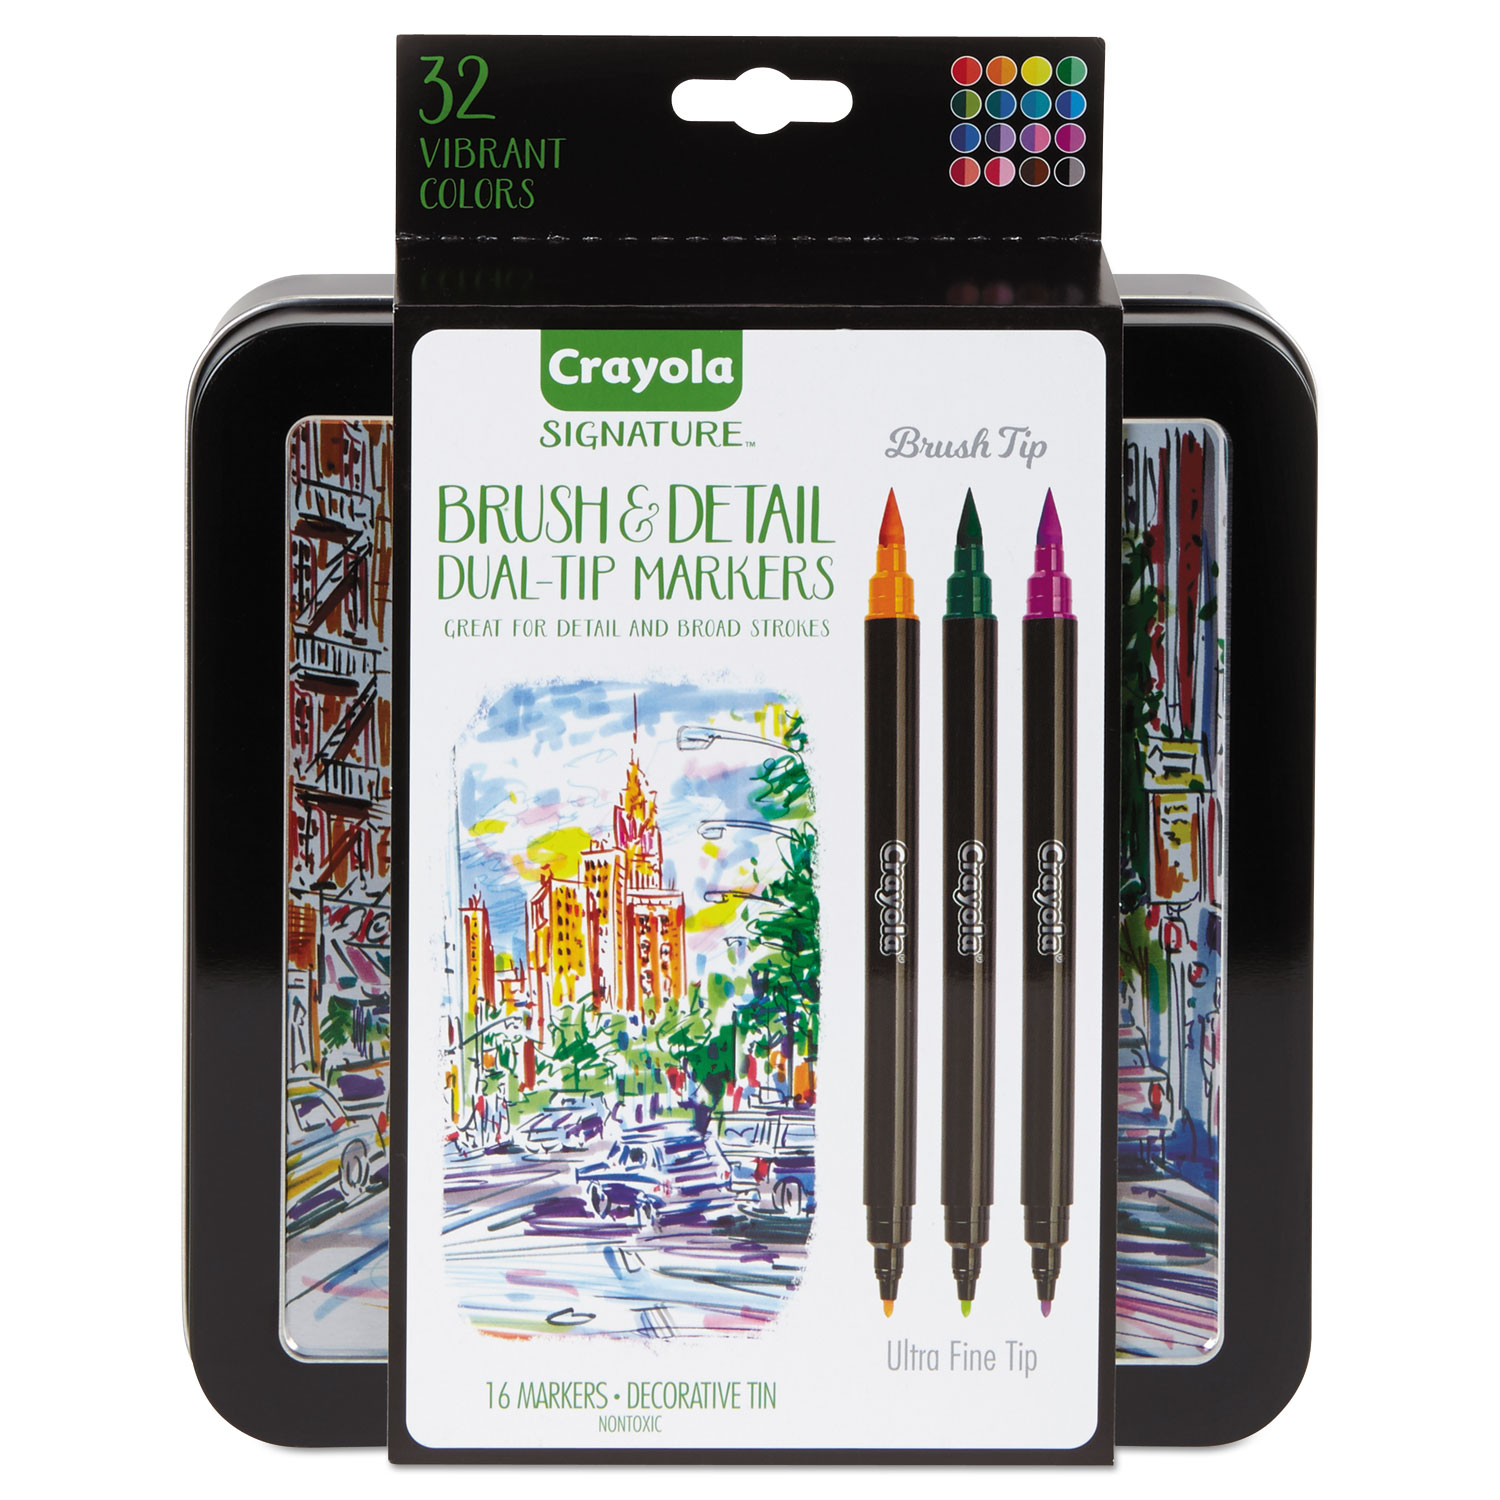 Crayola Dual-Tip Washable Markers, Broad Line & Chisel Tip, 10 Count